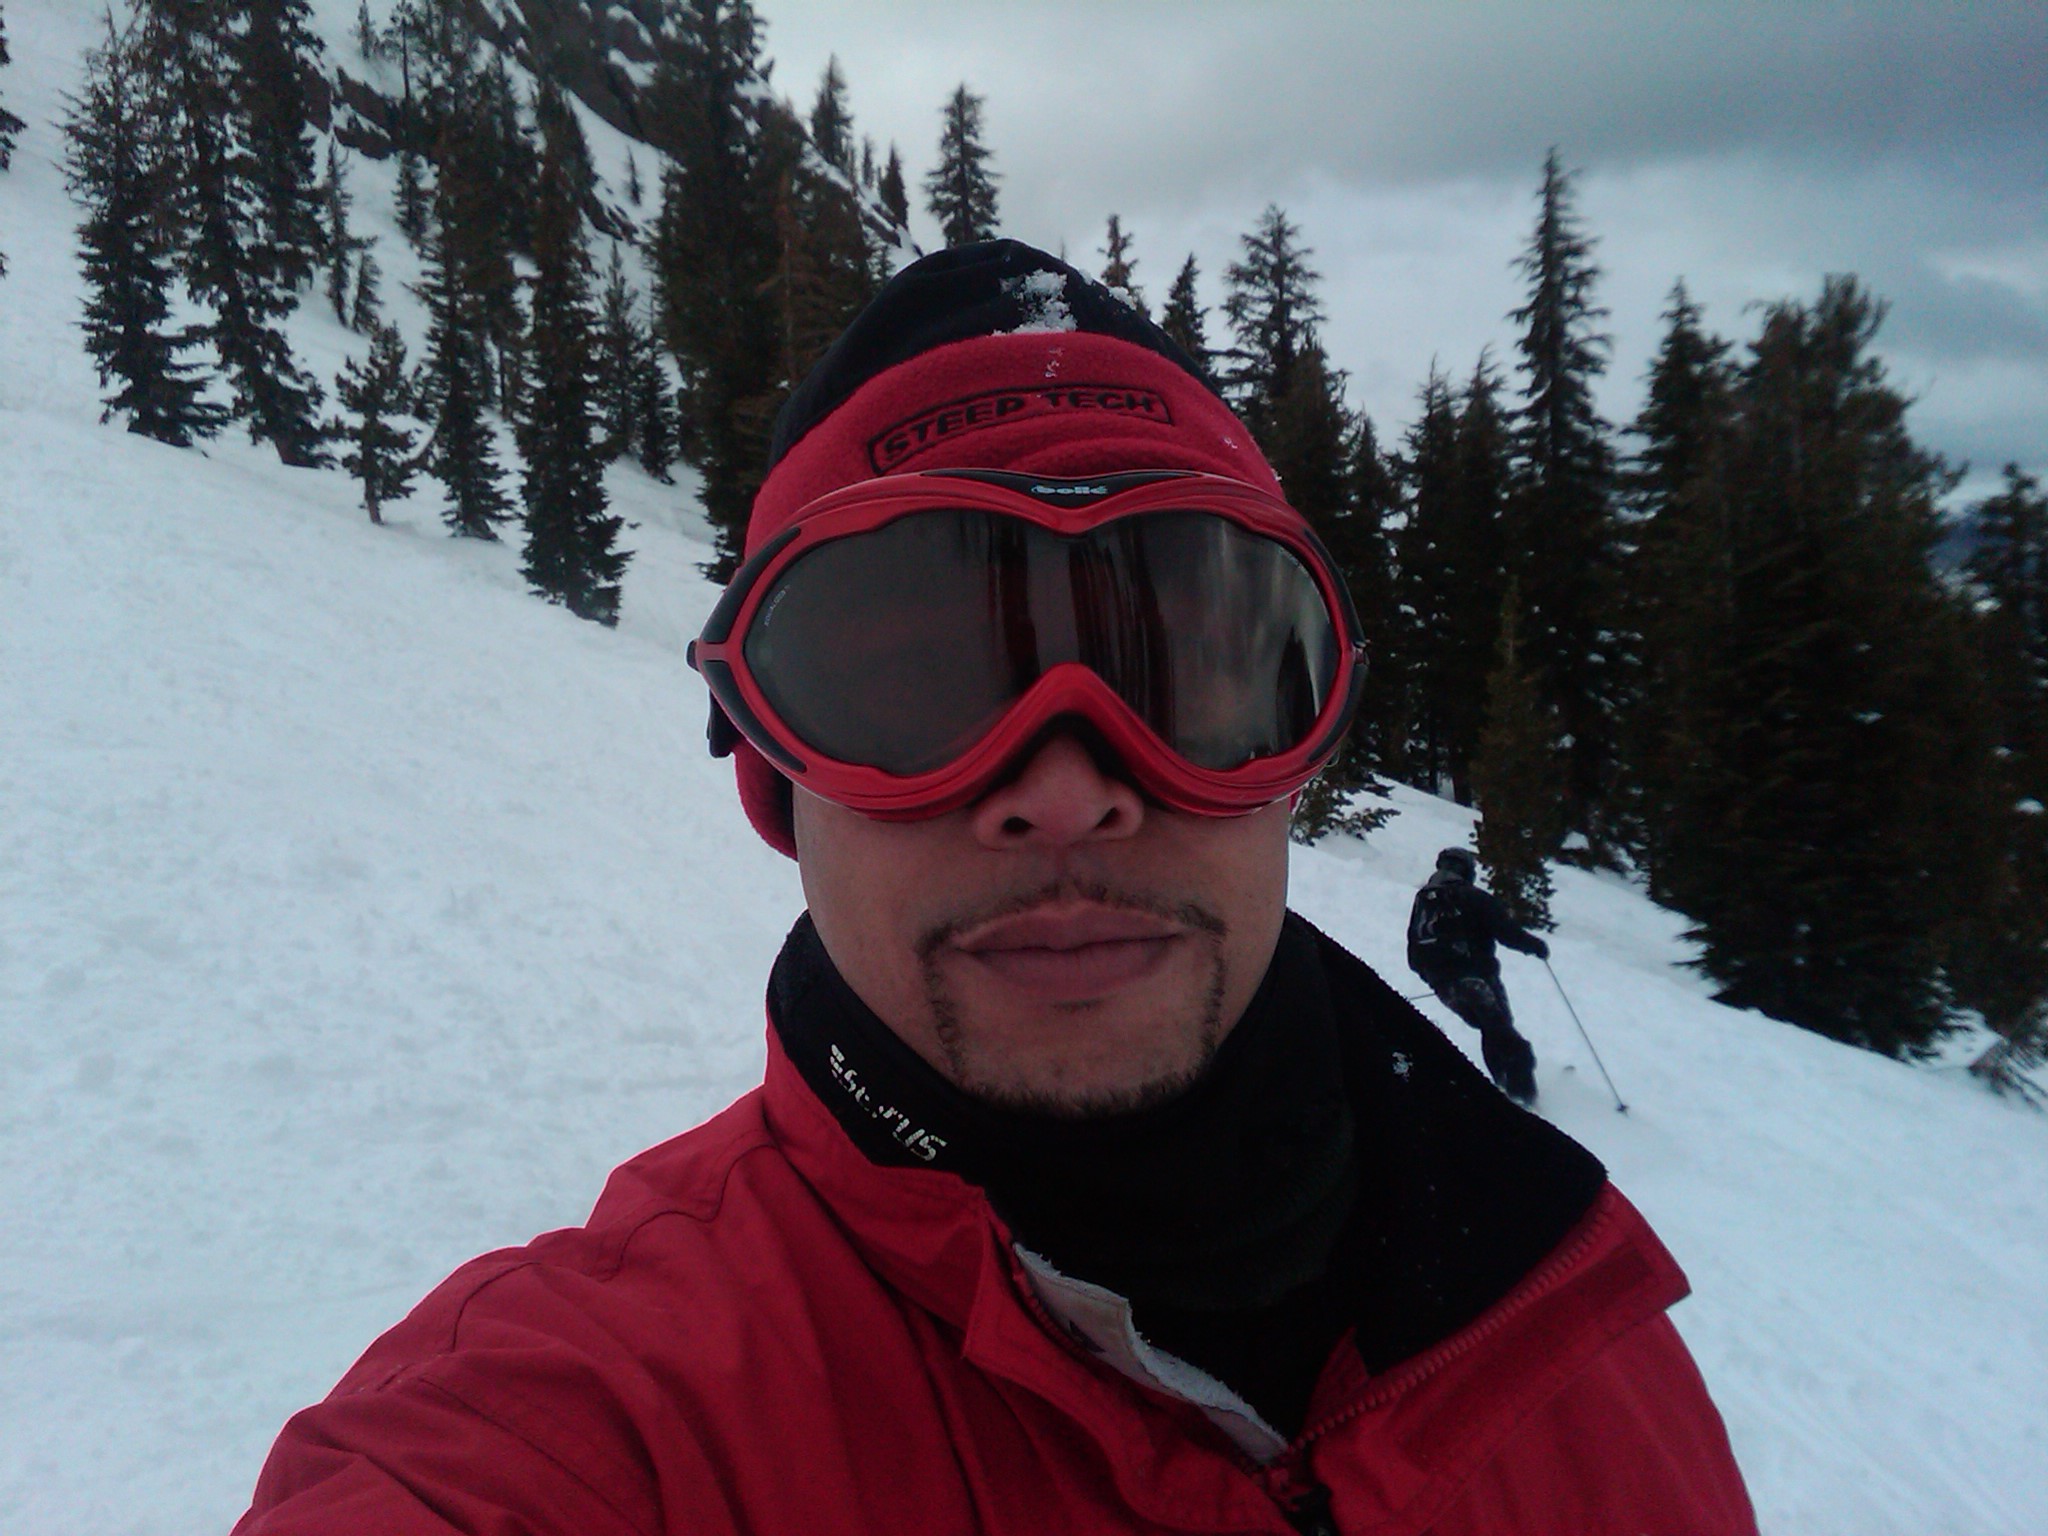 I'm a Double Black Diamond Skier, if Needed! @ Mammoth Mtn Pic